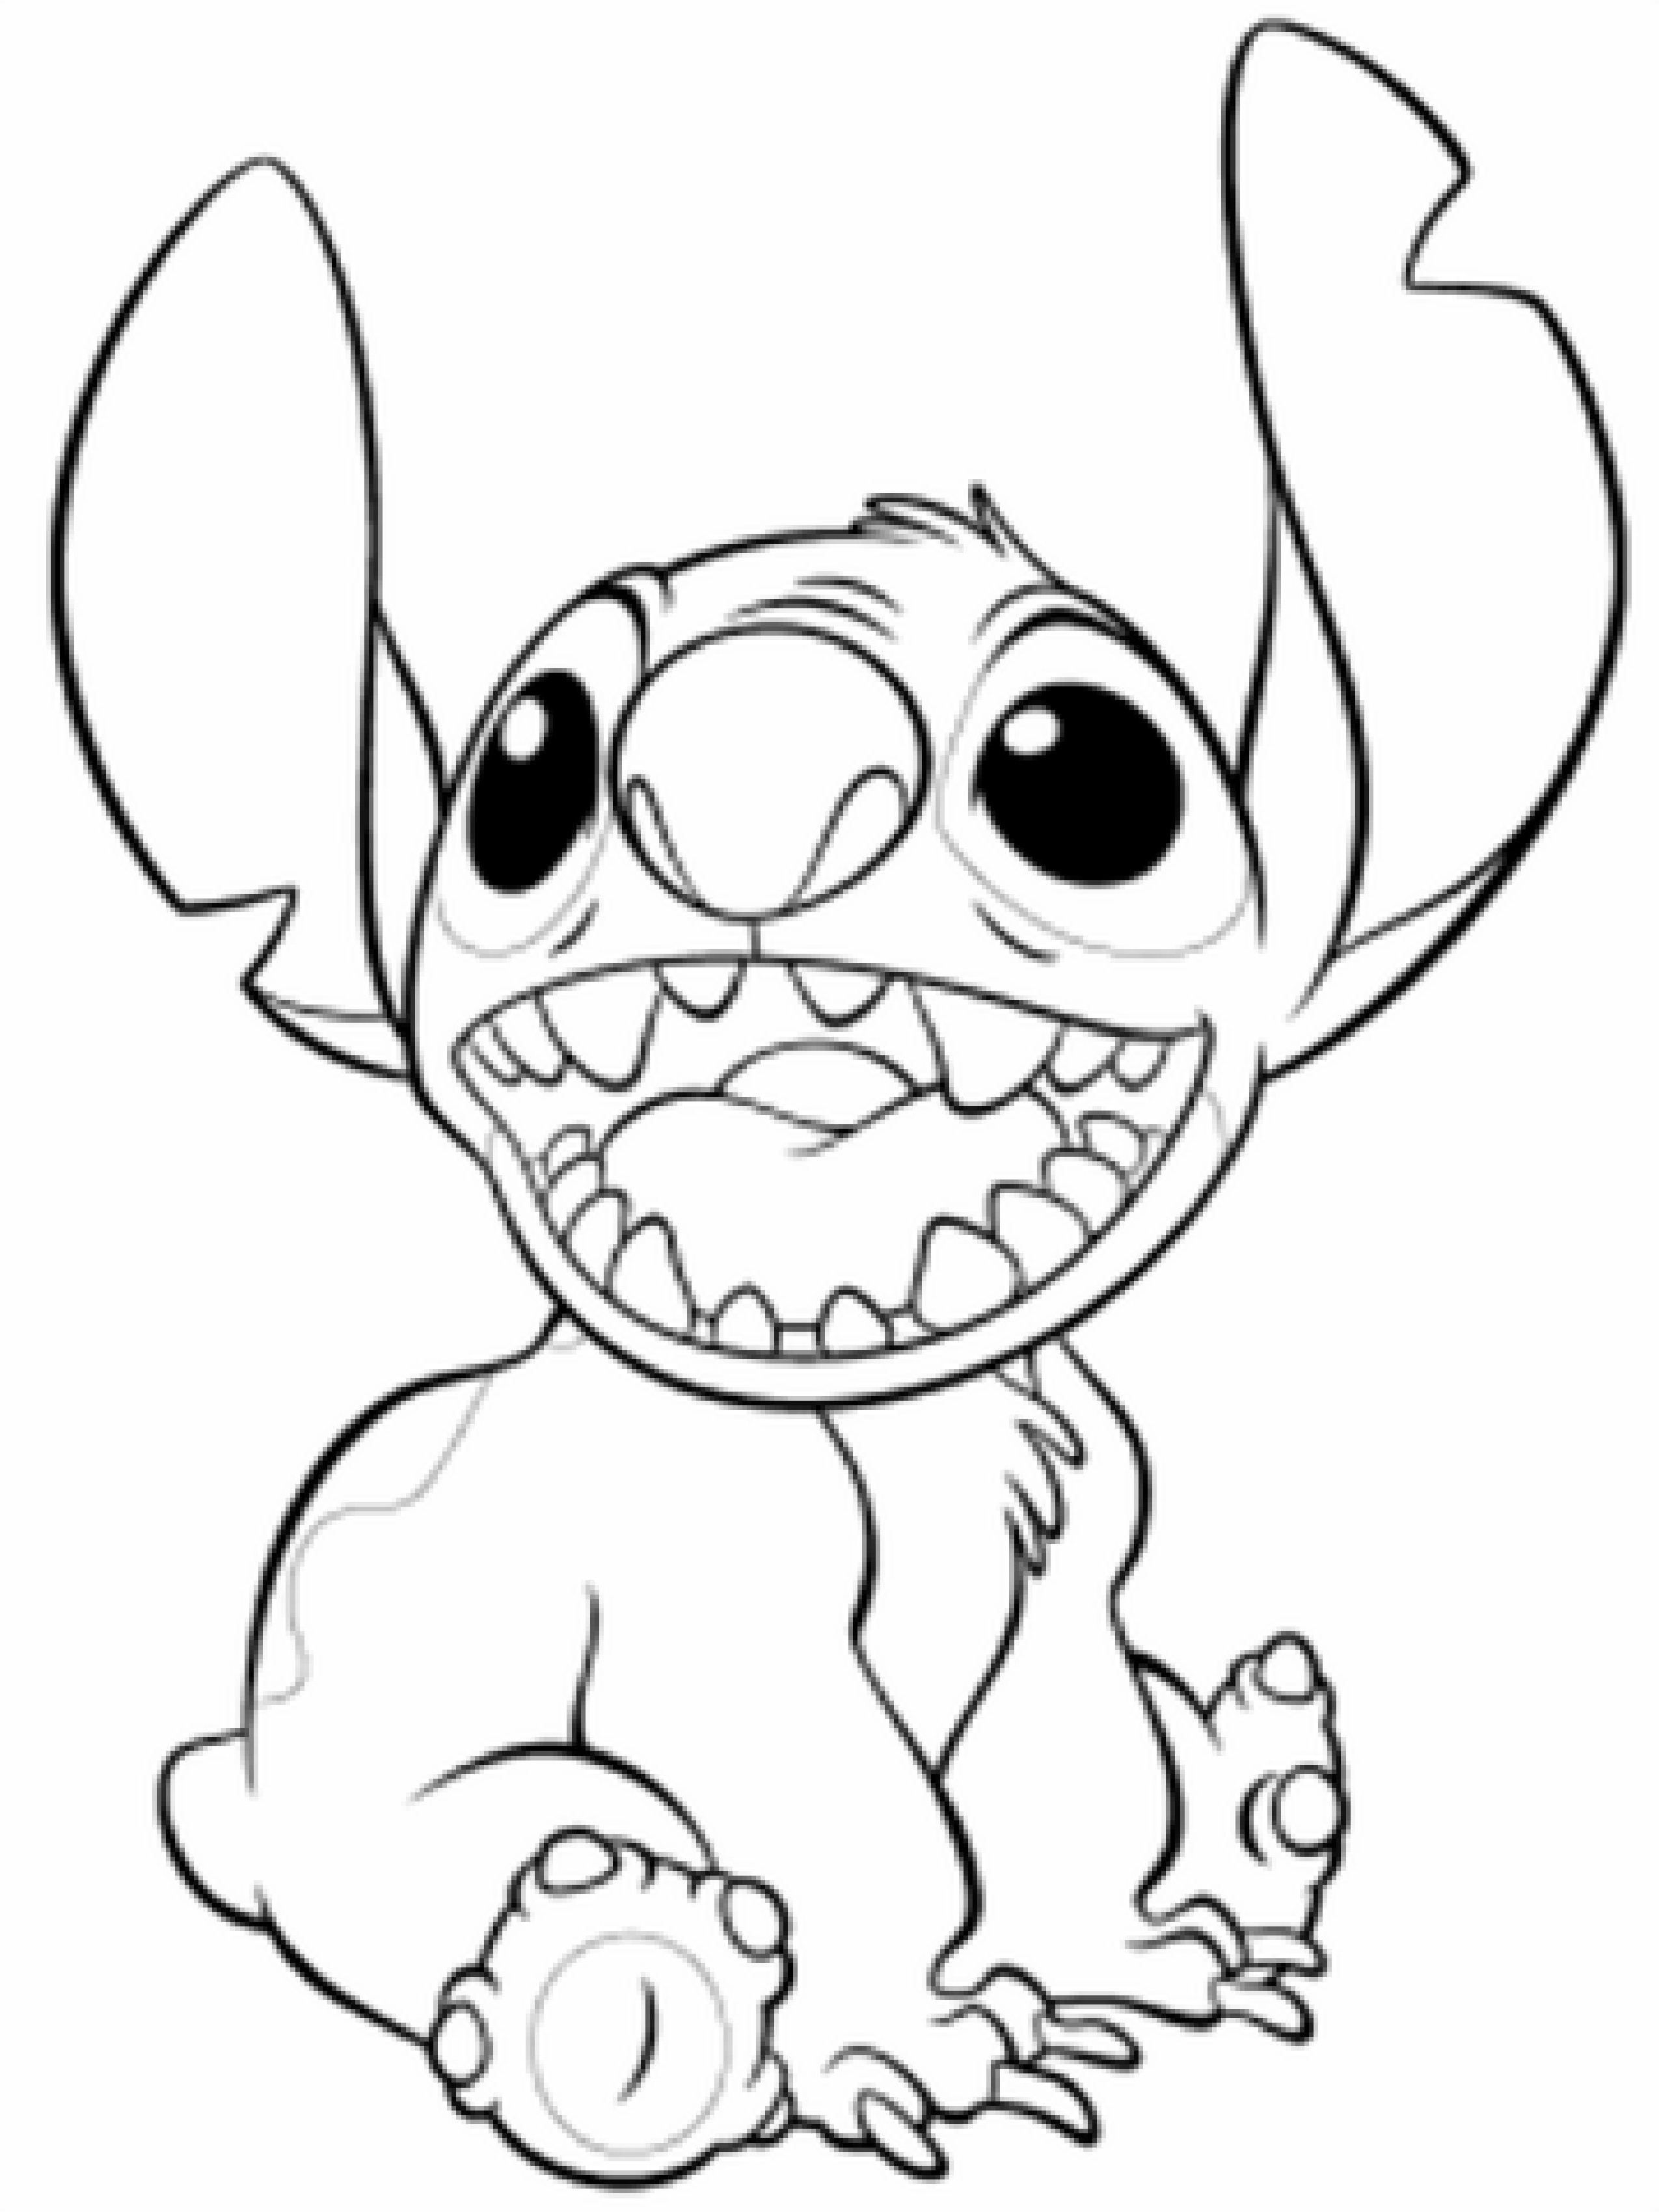 Amazing of Free Disney Coloring Pages In Disney Coloring #123